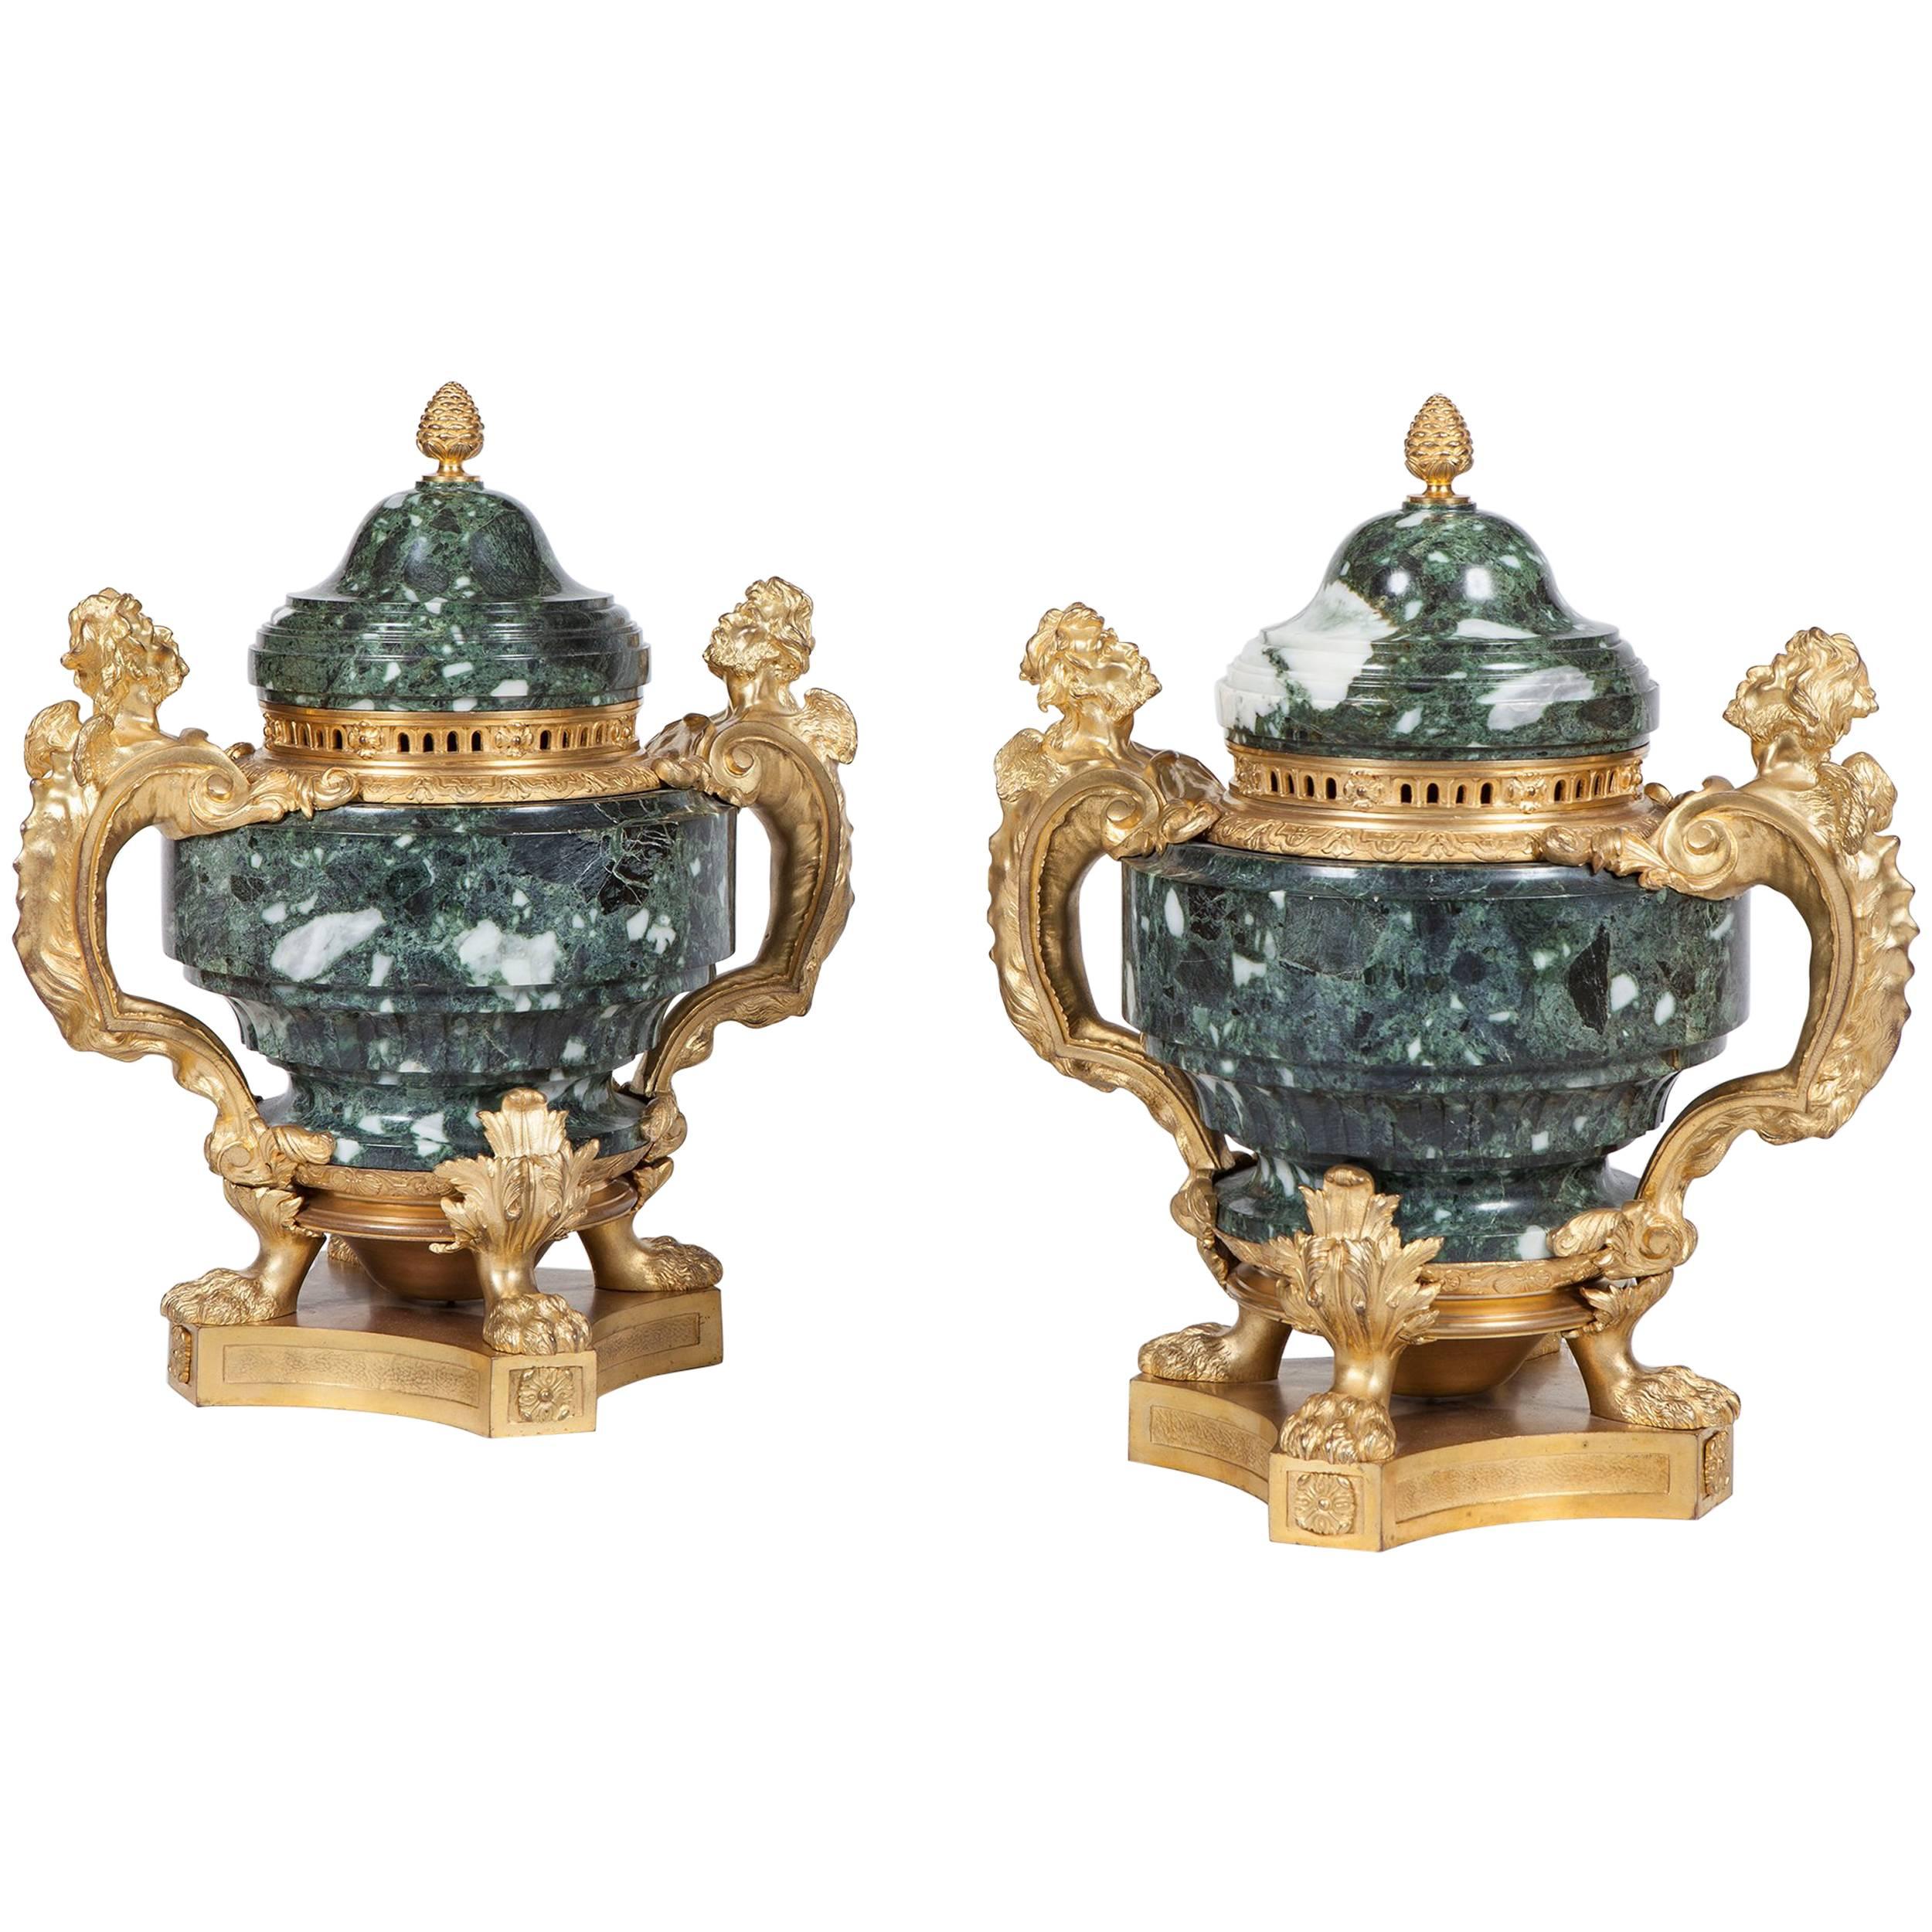 19th Century Pair of Green Marble and Ormolu Vases